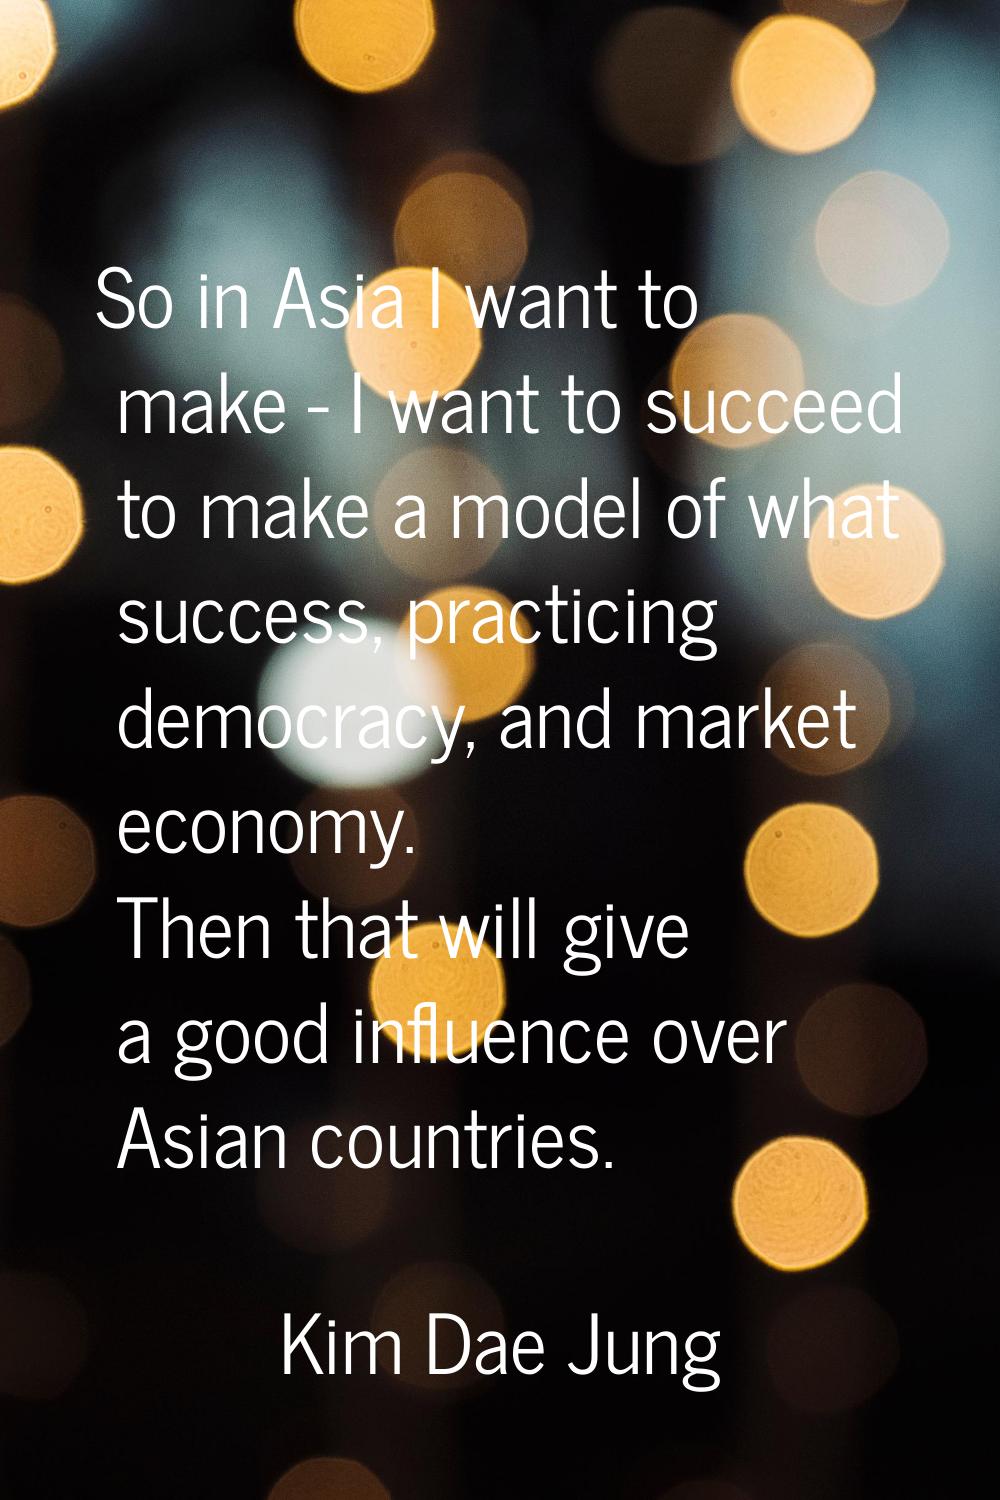 So in Asia I want to make - I want to succeed to make a model of what success, practicing democracy